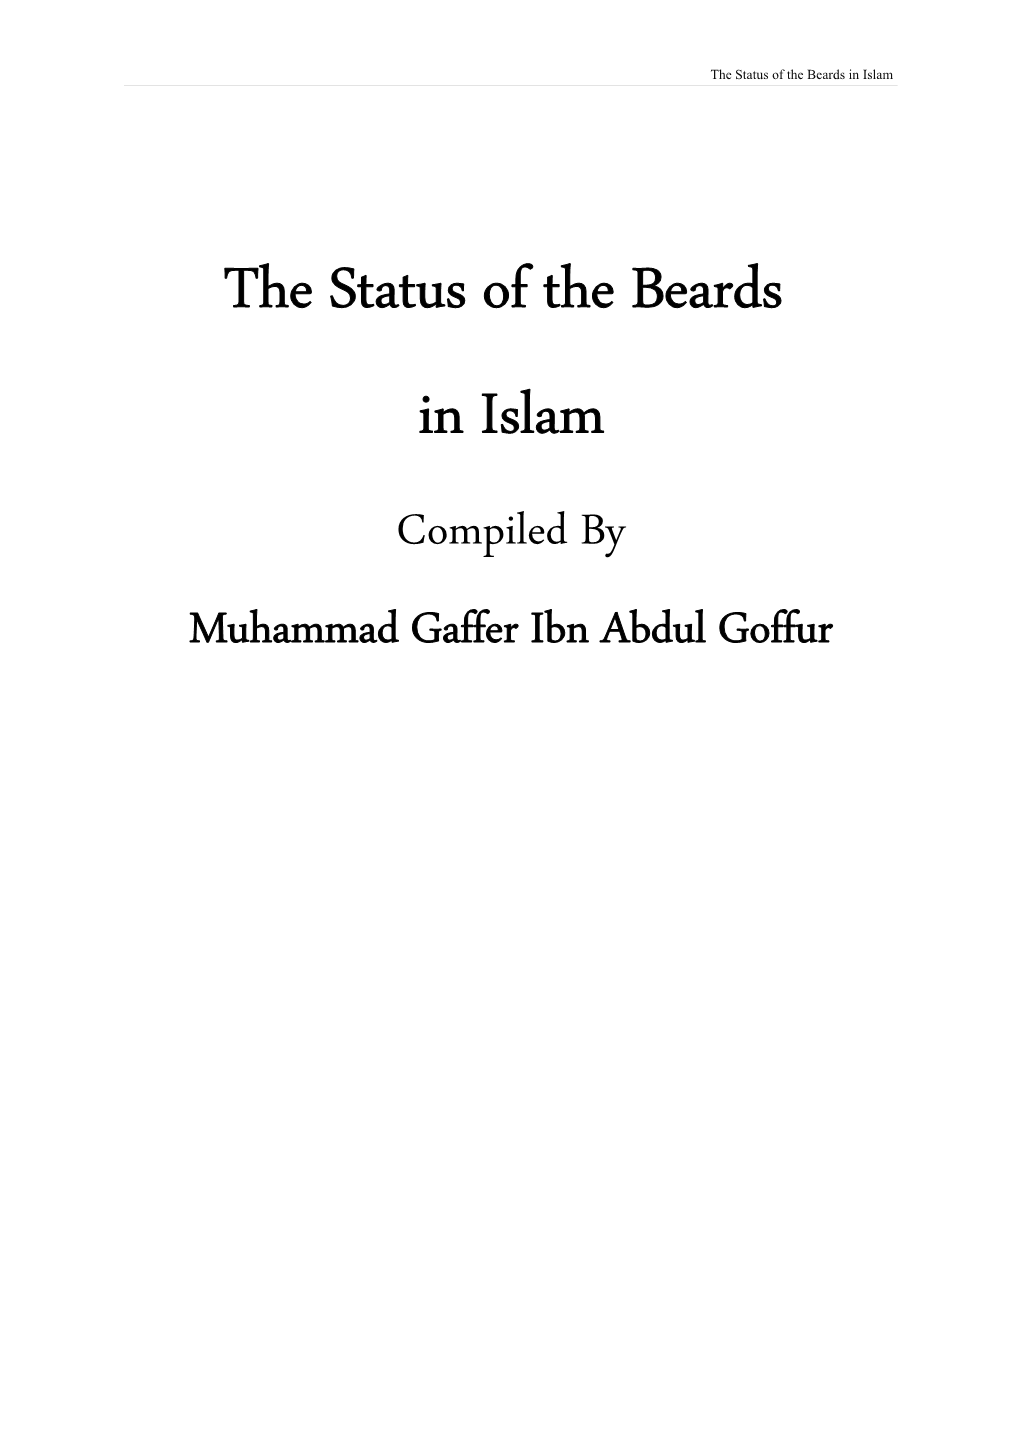 The Status of the Beards